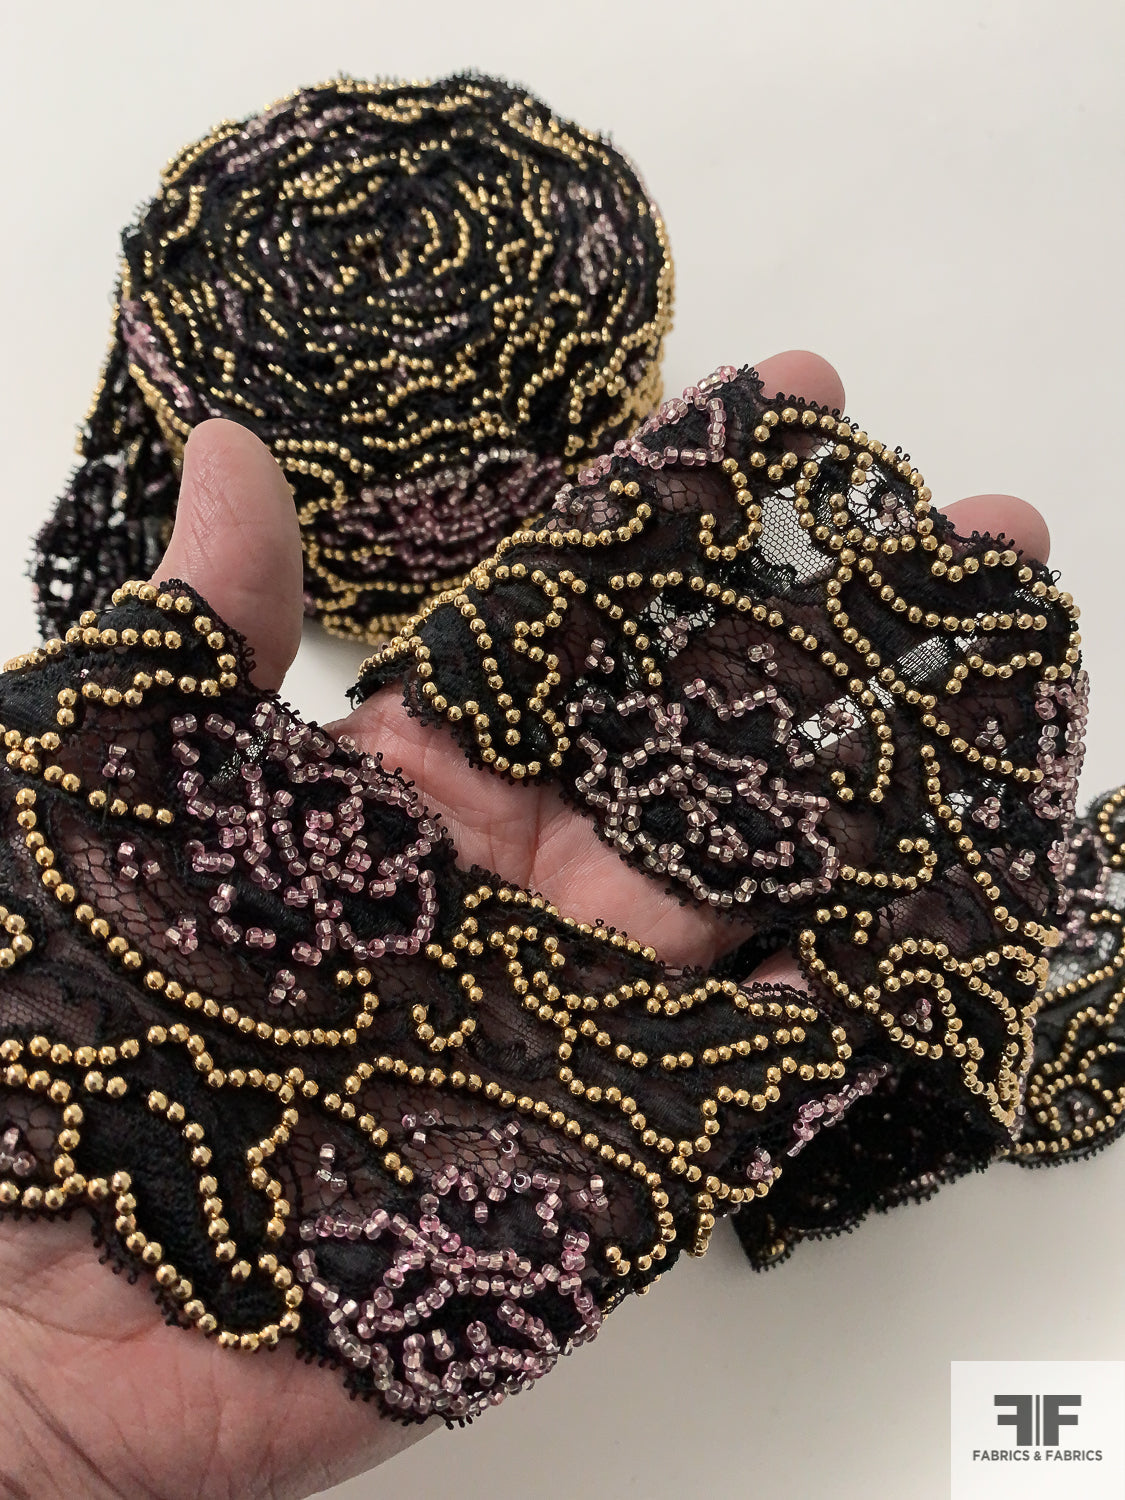 French Intricately Beaded Chantilly Lace Trim - Black / Gold / Taupe